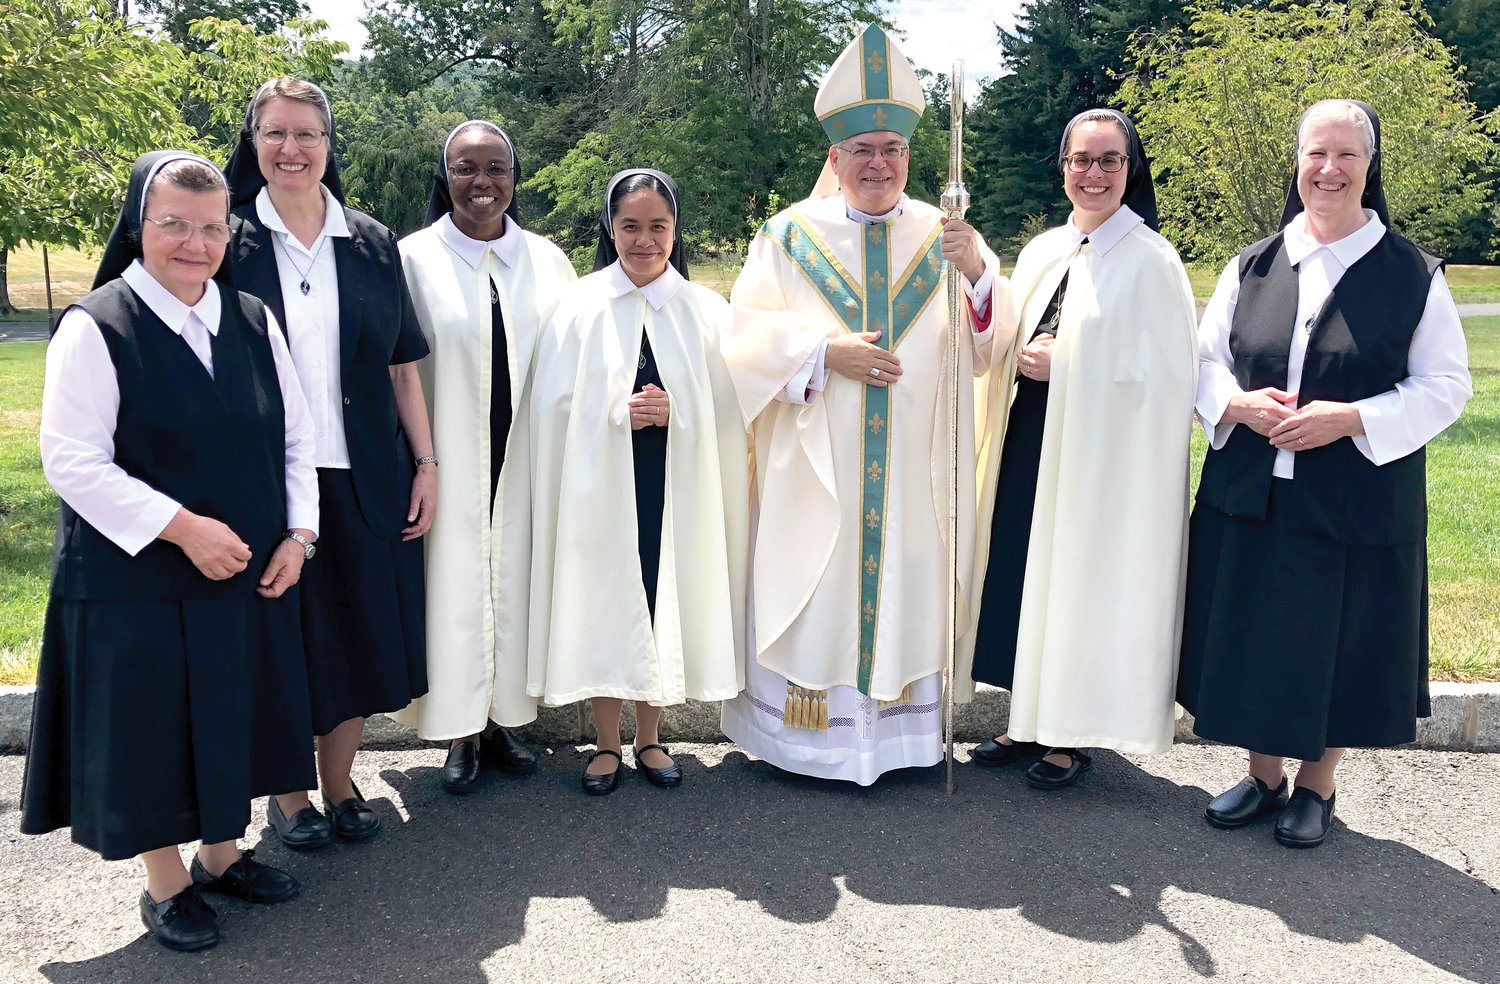 PROFESSED—From left, Sister Maria del Rosario, S.C.C., general superior; Sister Joann Marie Aumand, S.C.C., provincial superior of the Eastern Province; Sister Monique Eloizard, S.C.C.; Sister Luiza Simon, S.C.C.; Bishop Alfred A. Schlert, of Allentown, Pa.; Sister Regina Bathalon, S.C.C.; and Sister Mary Joseph Schultz, S.C.C., general councilor and tertianship director, stand outside Mallinckrodt Convent in Mendham, N.J., following the final profession of vows Aug. 15.